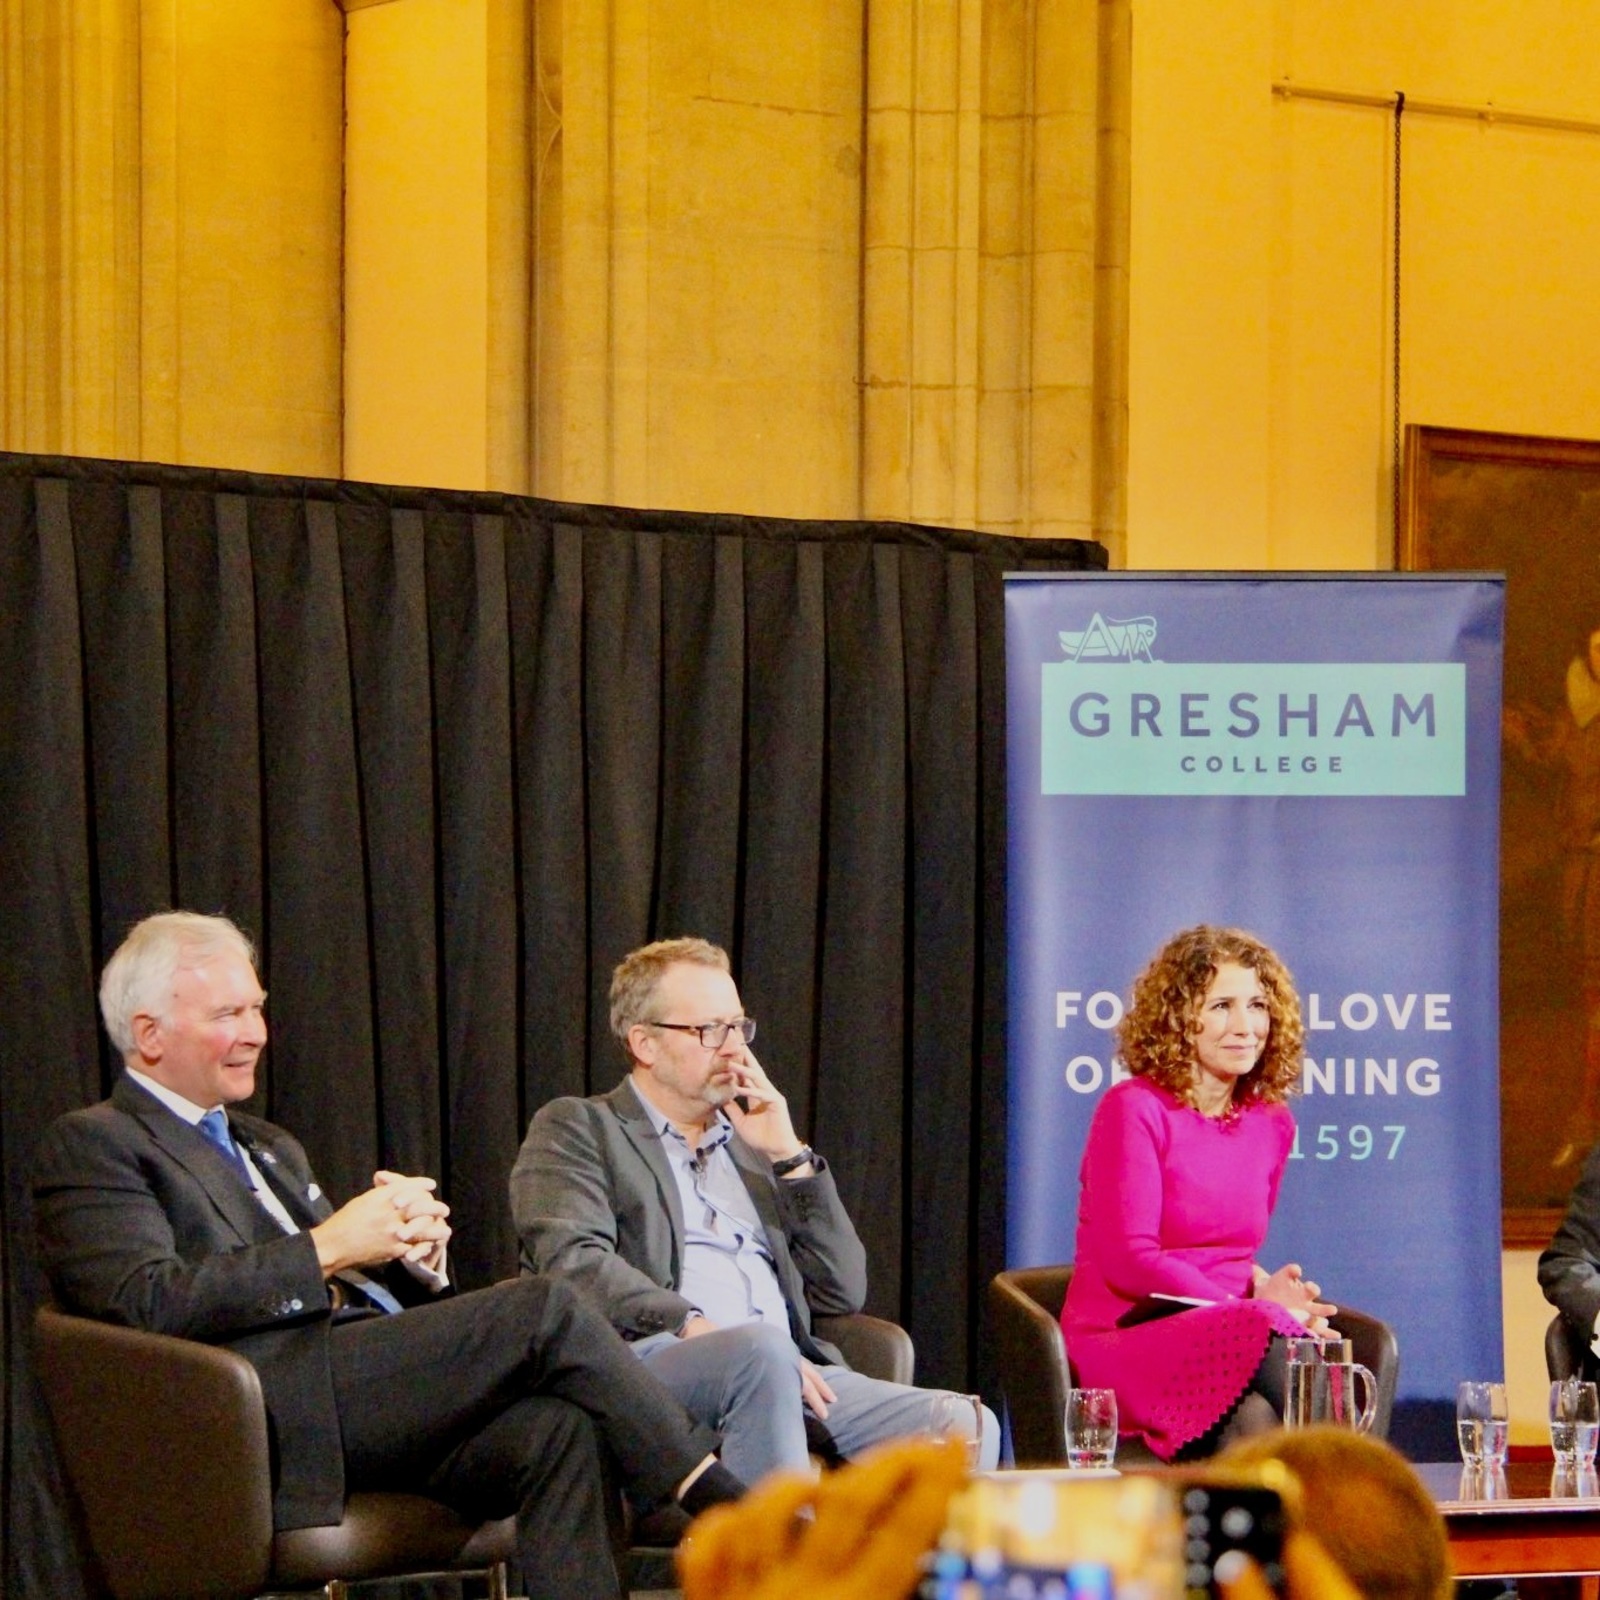 13 Feb 23 - The Lord Mayor’s Annual Gresham lecture was a tour de force.